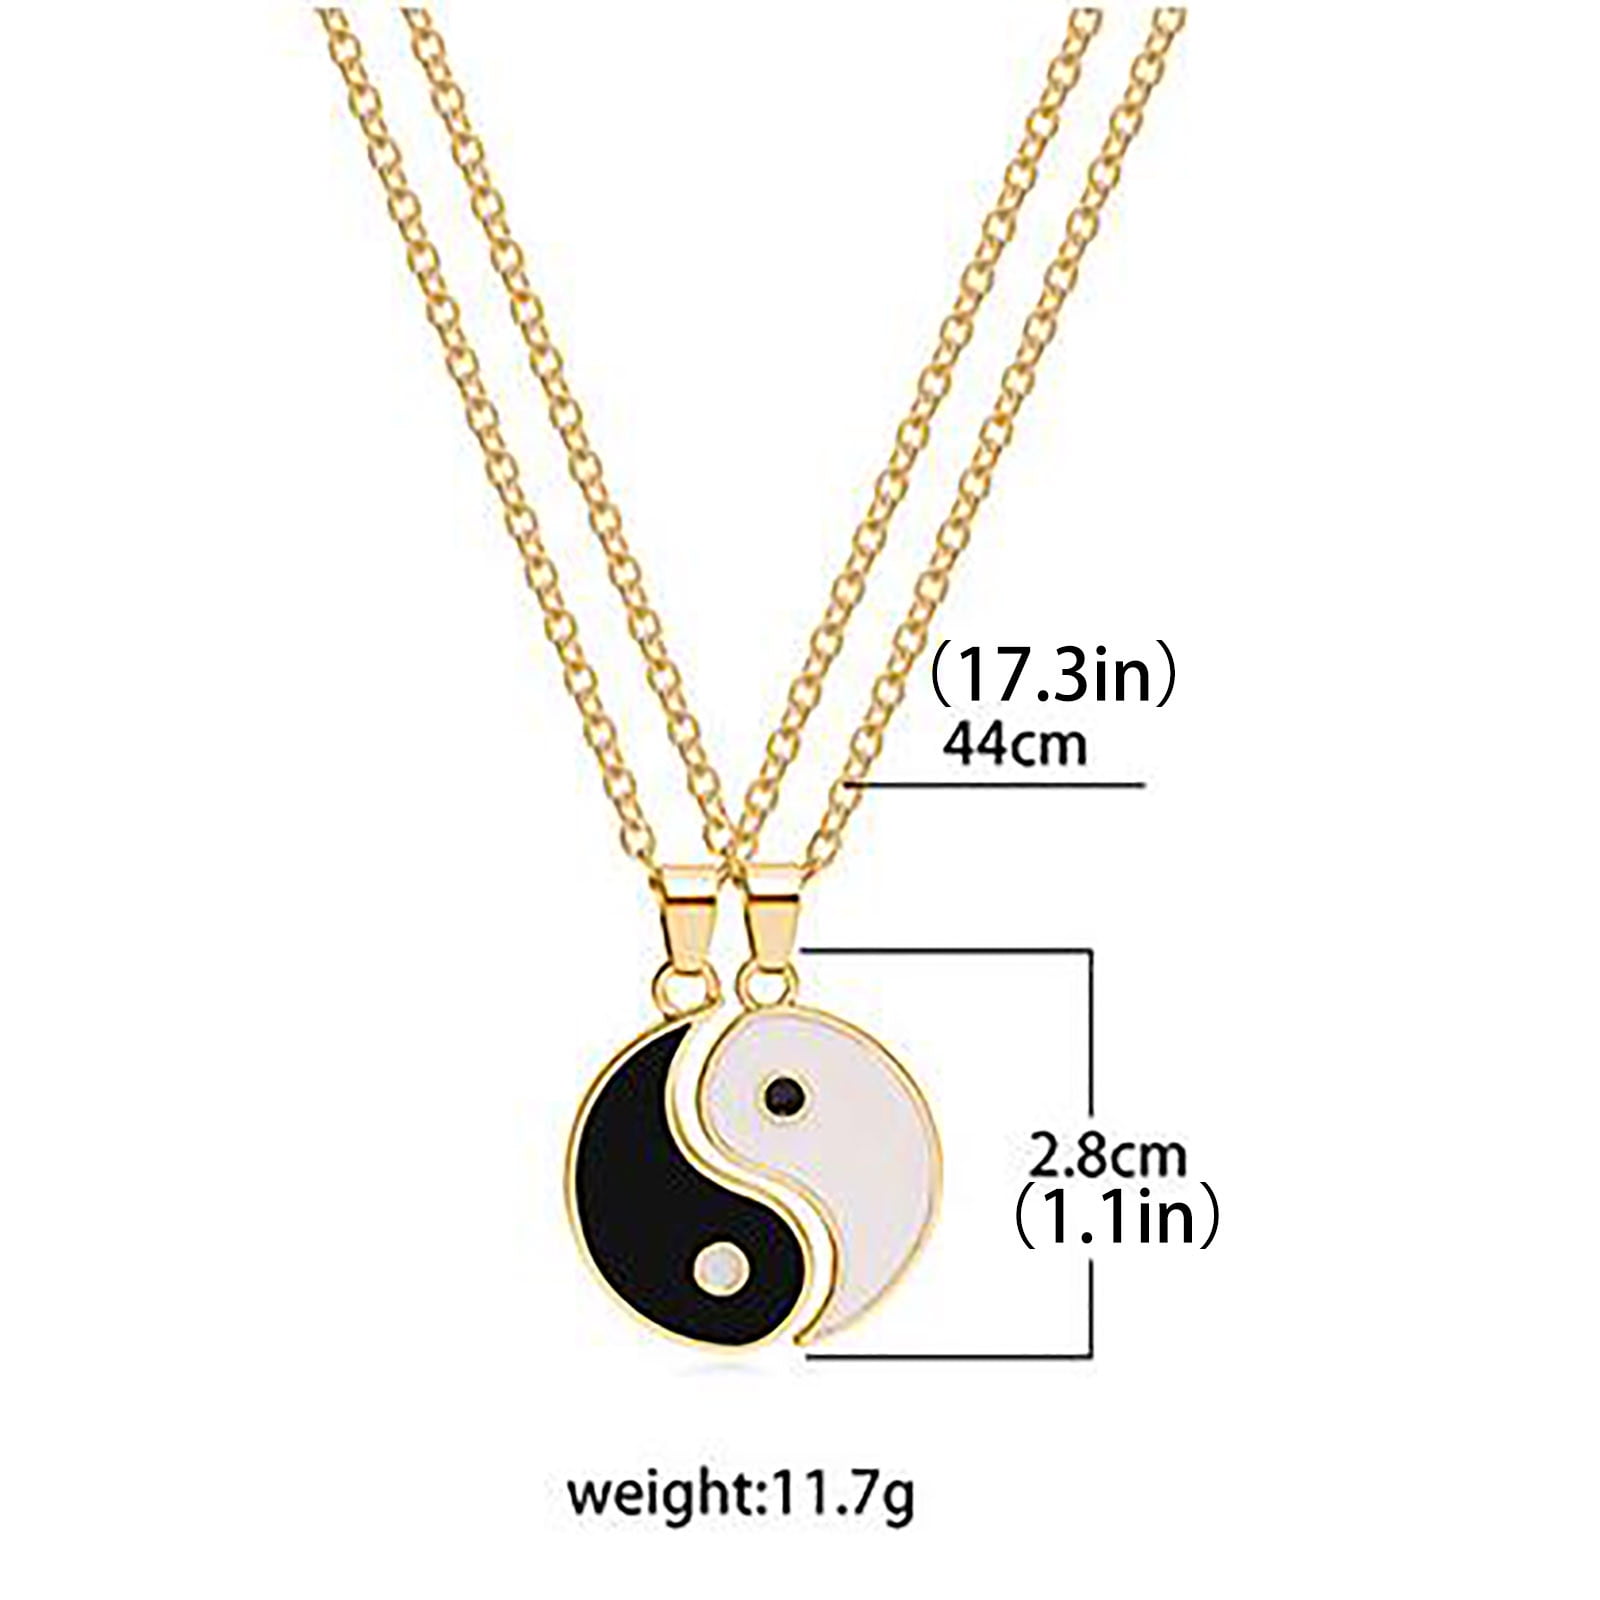 Details about   Real 18K Yellow Gold Filled Hypo-allergenic 20inch 1.2mm Thin Box Chain Necklace 